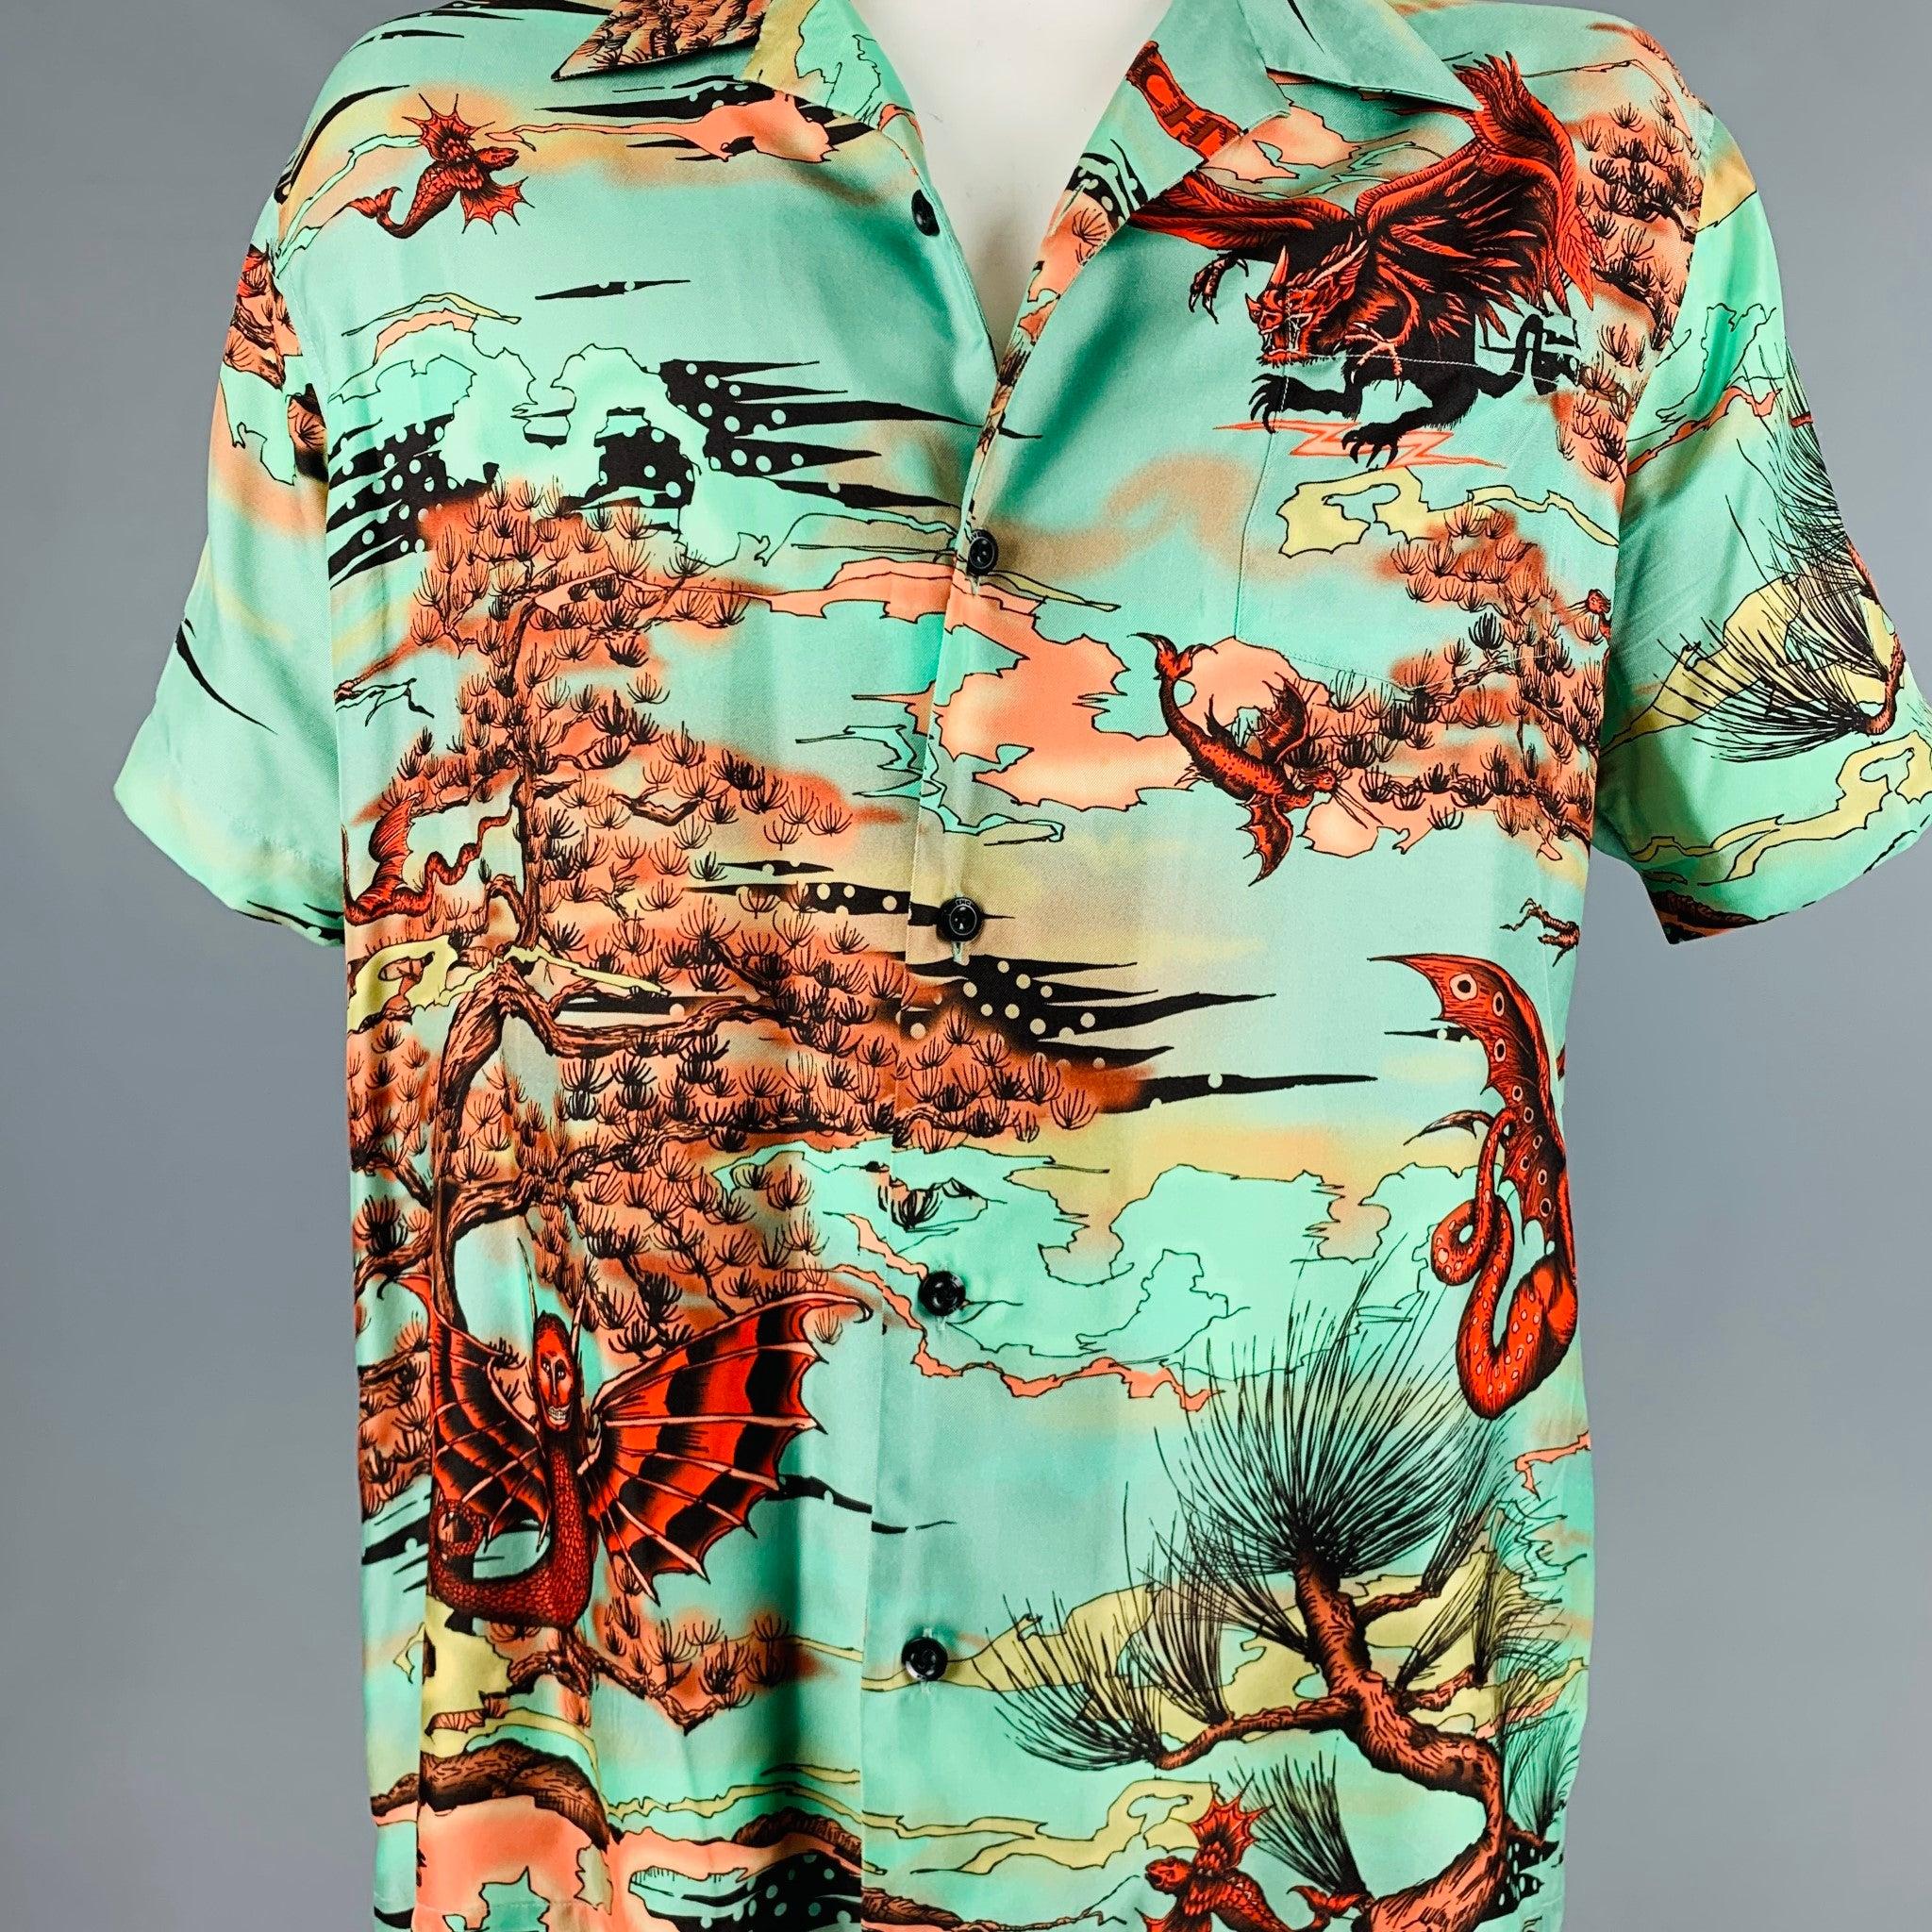 GIVENCHY short sleeve shirt
in a green silk fabric featuring red and orange fantasy print, camp style, and button closure.Very Good Pre-Owned Condition. Minor signs of wear, minor mark. Care tags removed. 

Marked:   42 

Measurements: 
 
Shoulder: